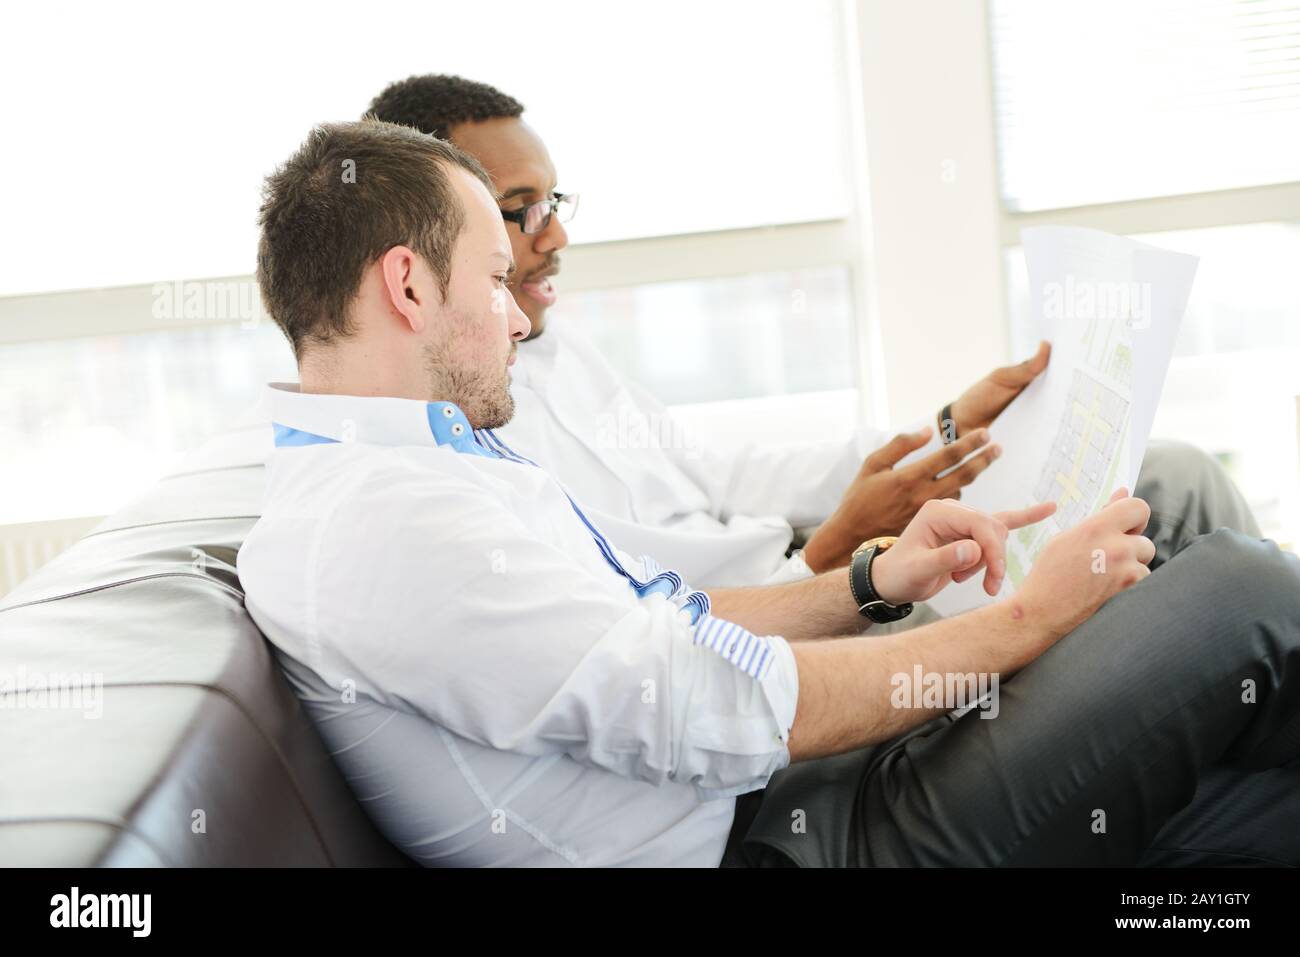 Group of multi ethnic business people at work discussing a project Stock Photo